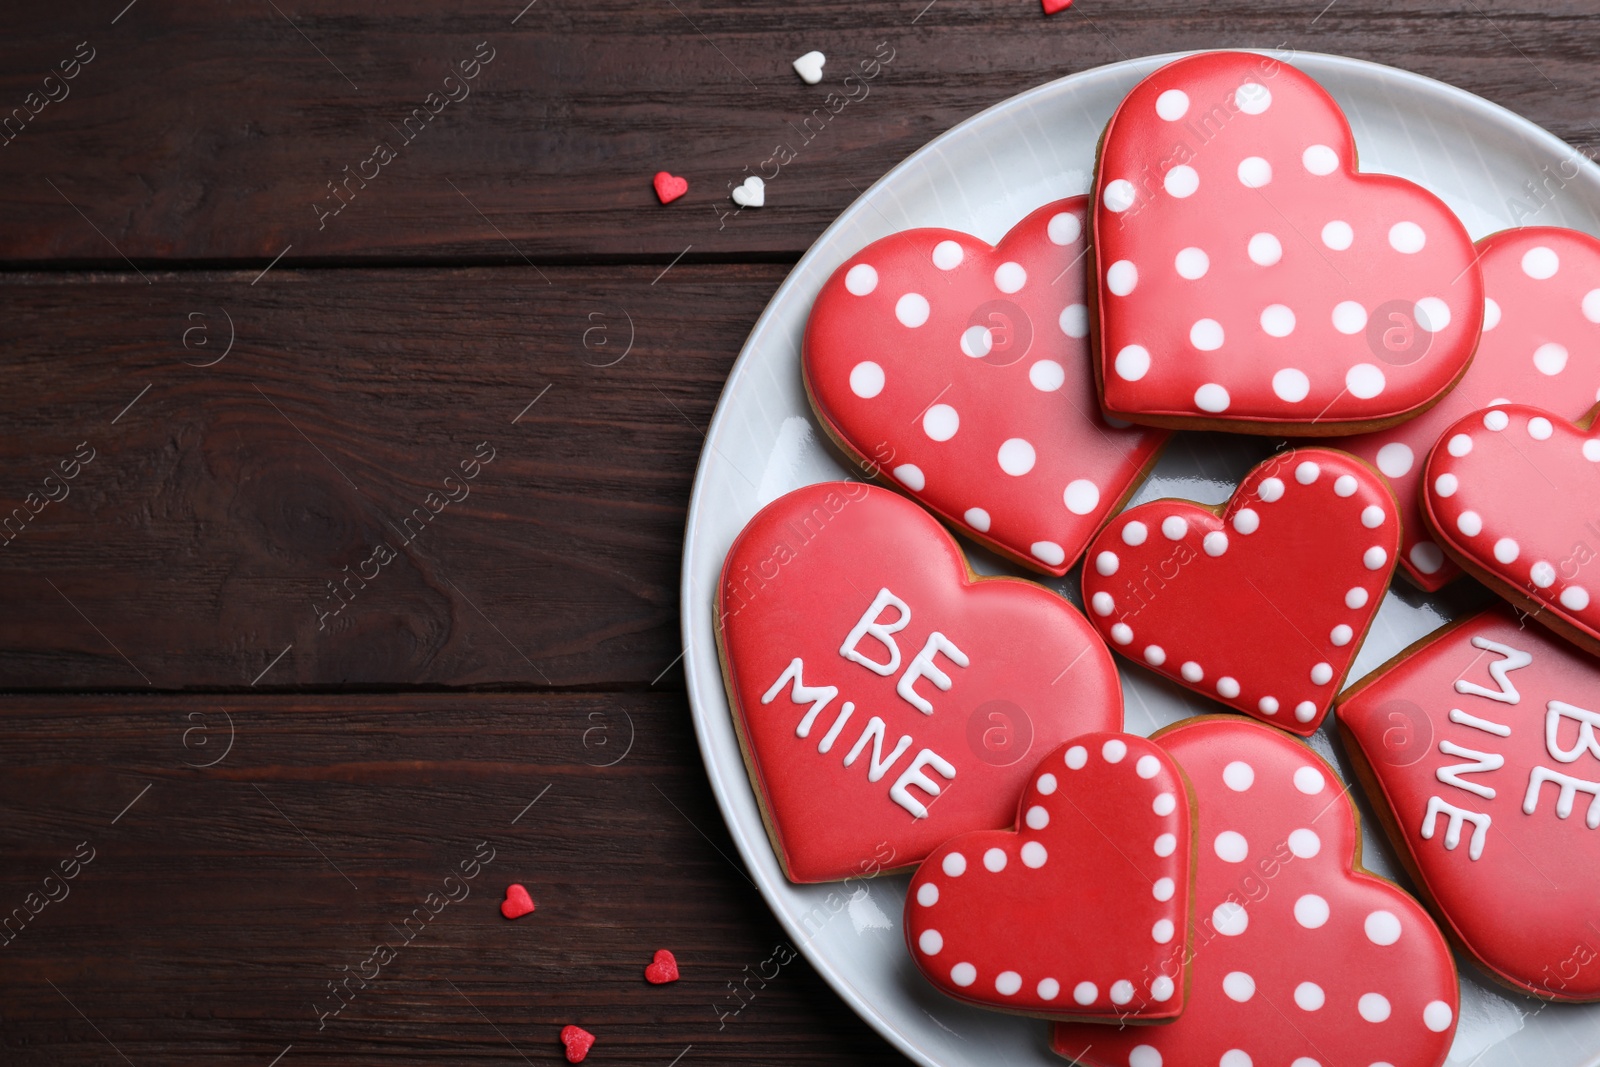 Photo of Heart shaped cookies on wooden table, flat lay with space for text. Valentine's day treat